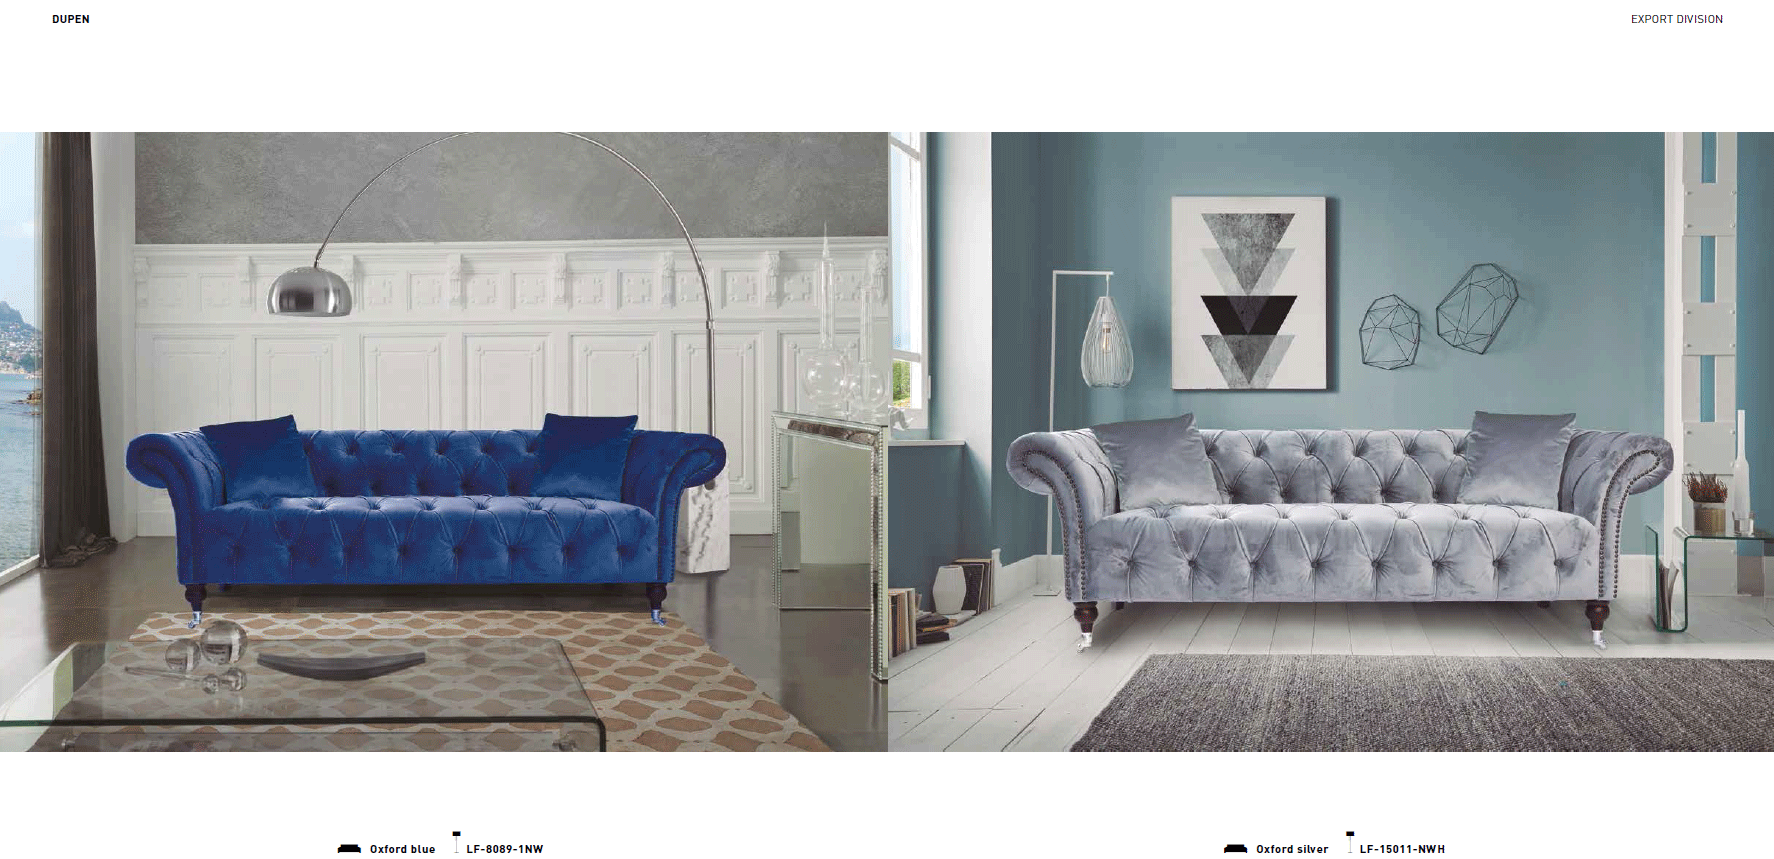 Living Room Furniture Sectionals Oxford Sofa, FL-15011-NWH, LF-8089-1NW